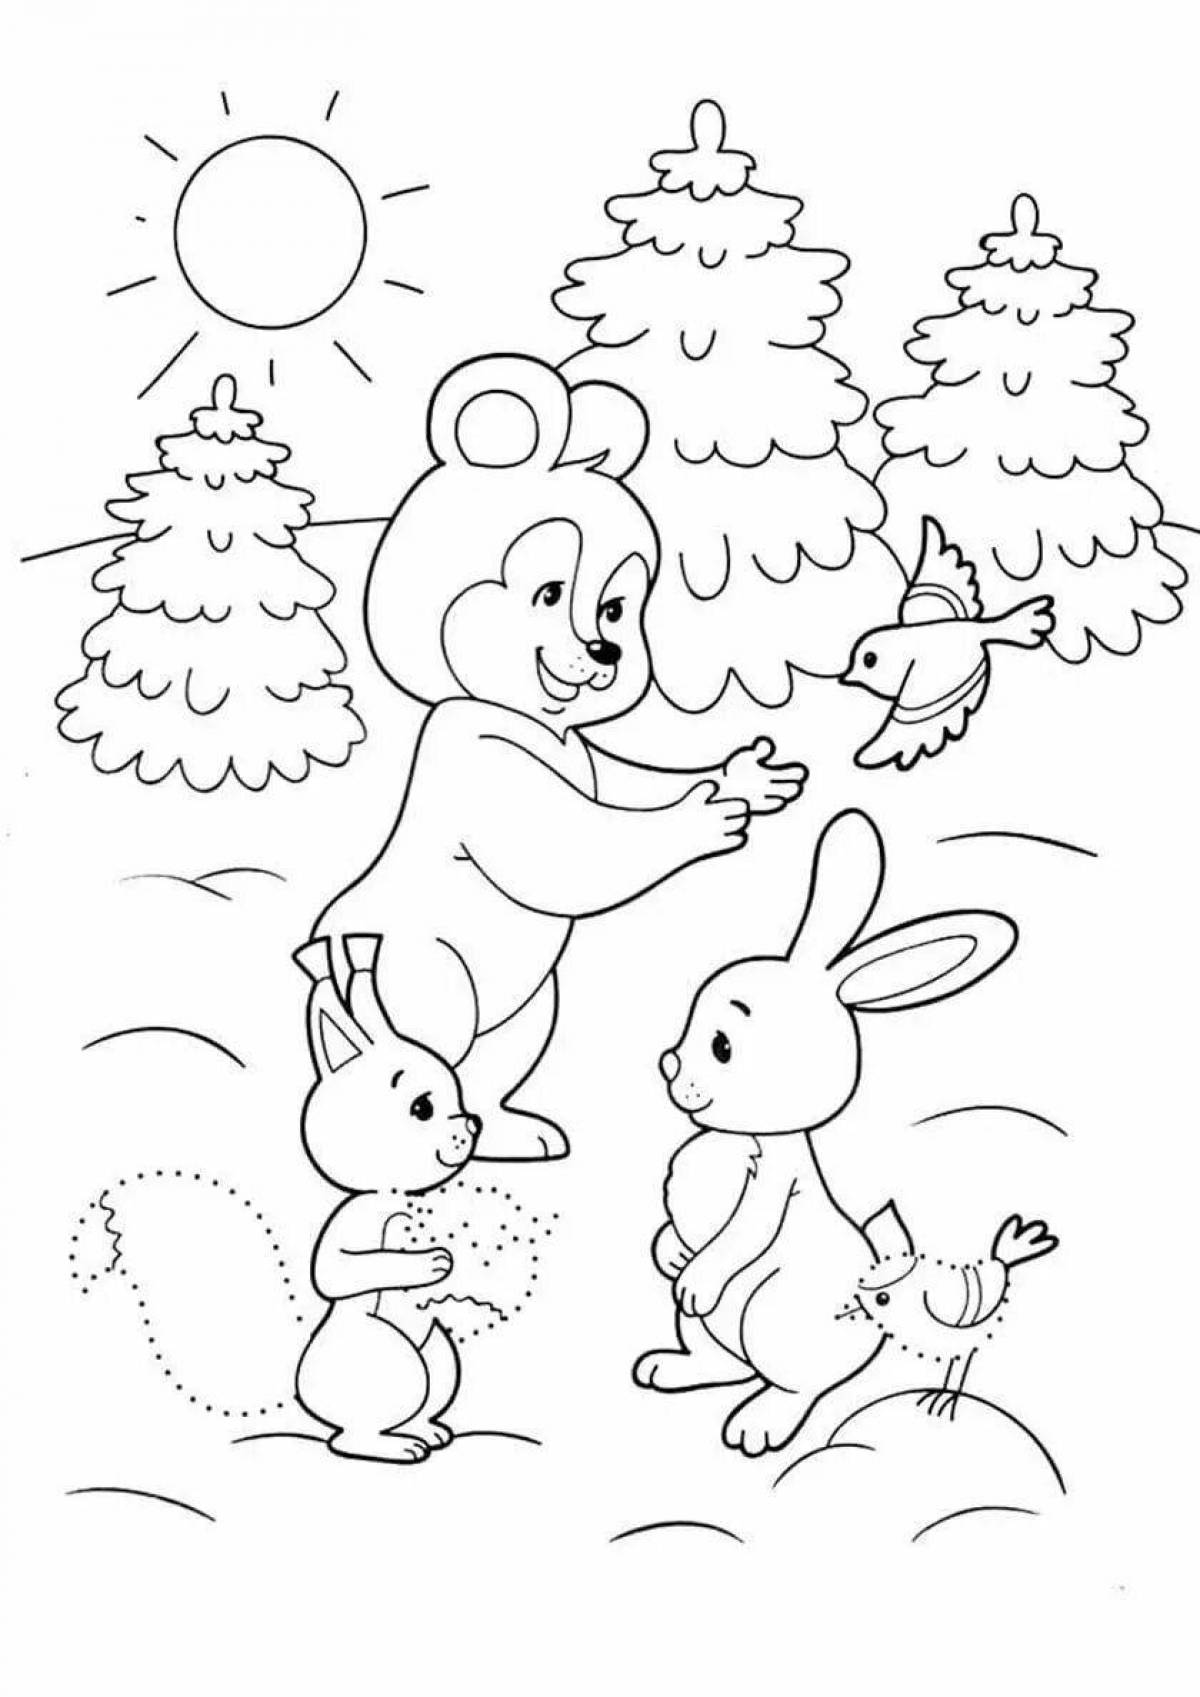 Coloring bright winter for children 3 years old